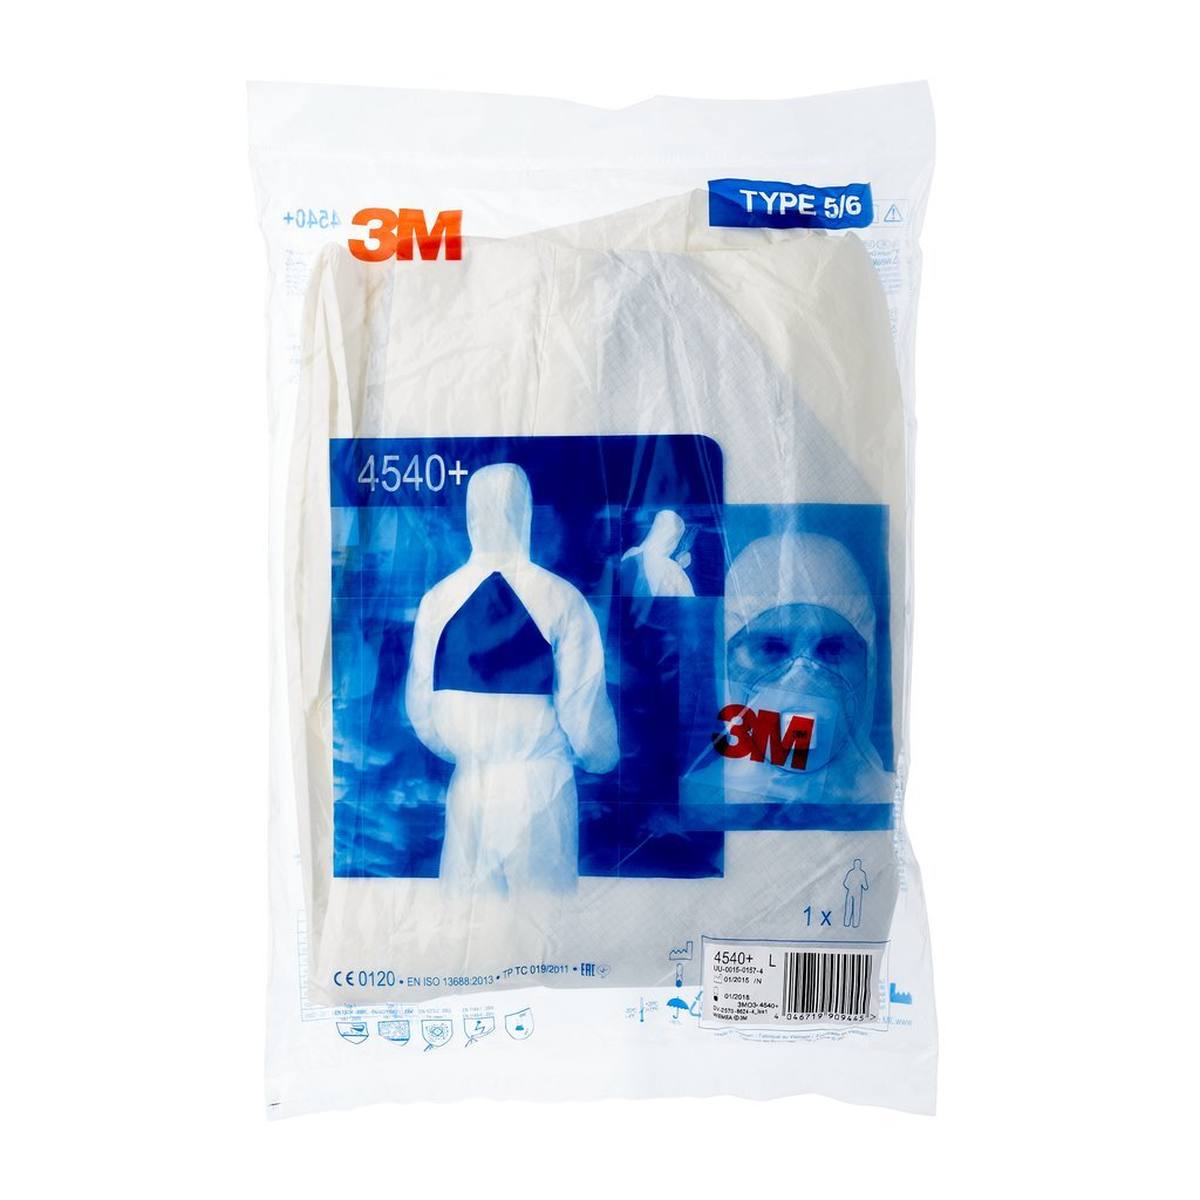 3M 4540+ coverall, white+blue, type 5/6, size XL, robust, lint-free, reinforced seams, SMMMS material, breathable, detachable zipper, knitted cuffs